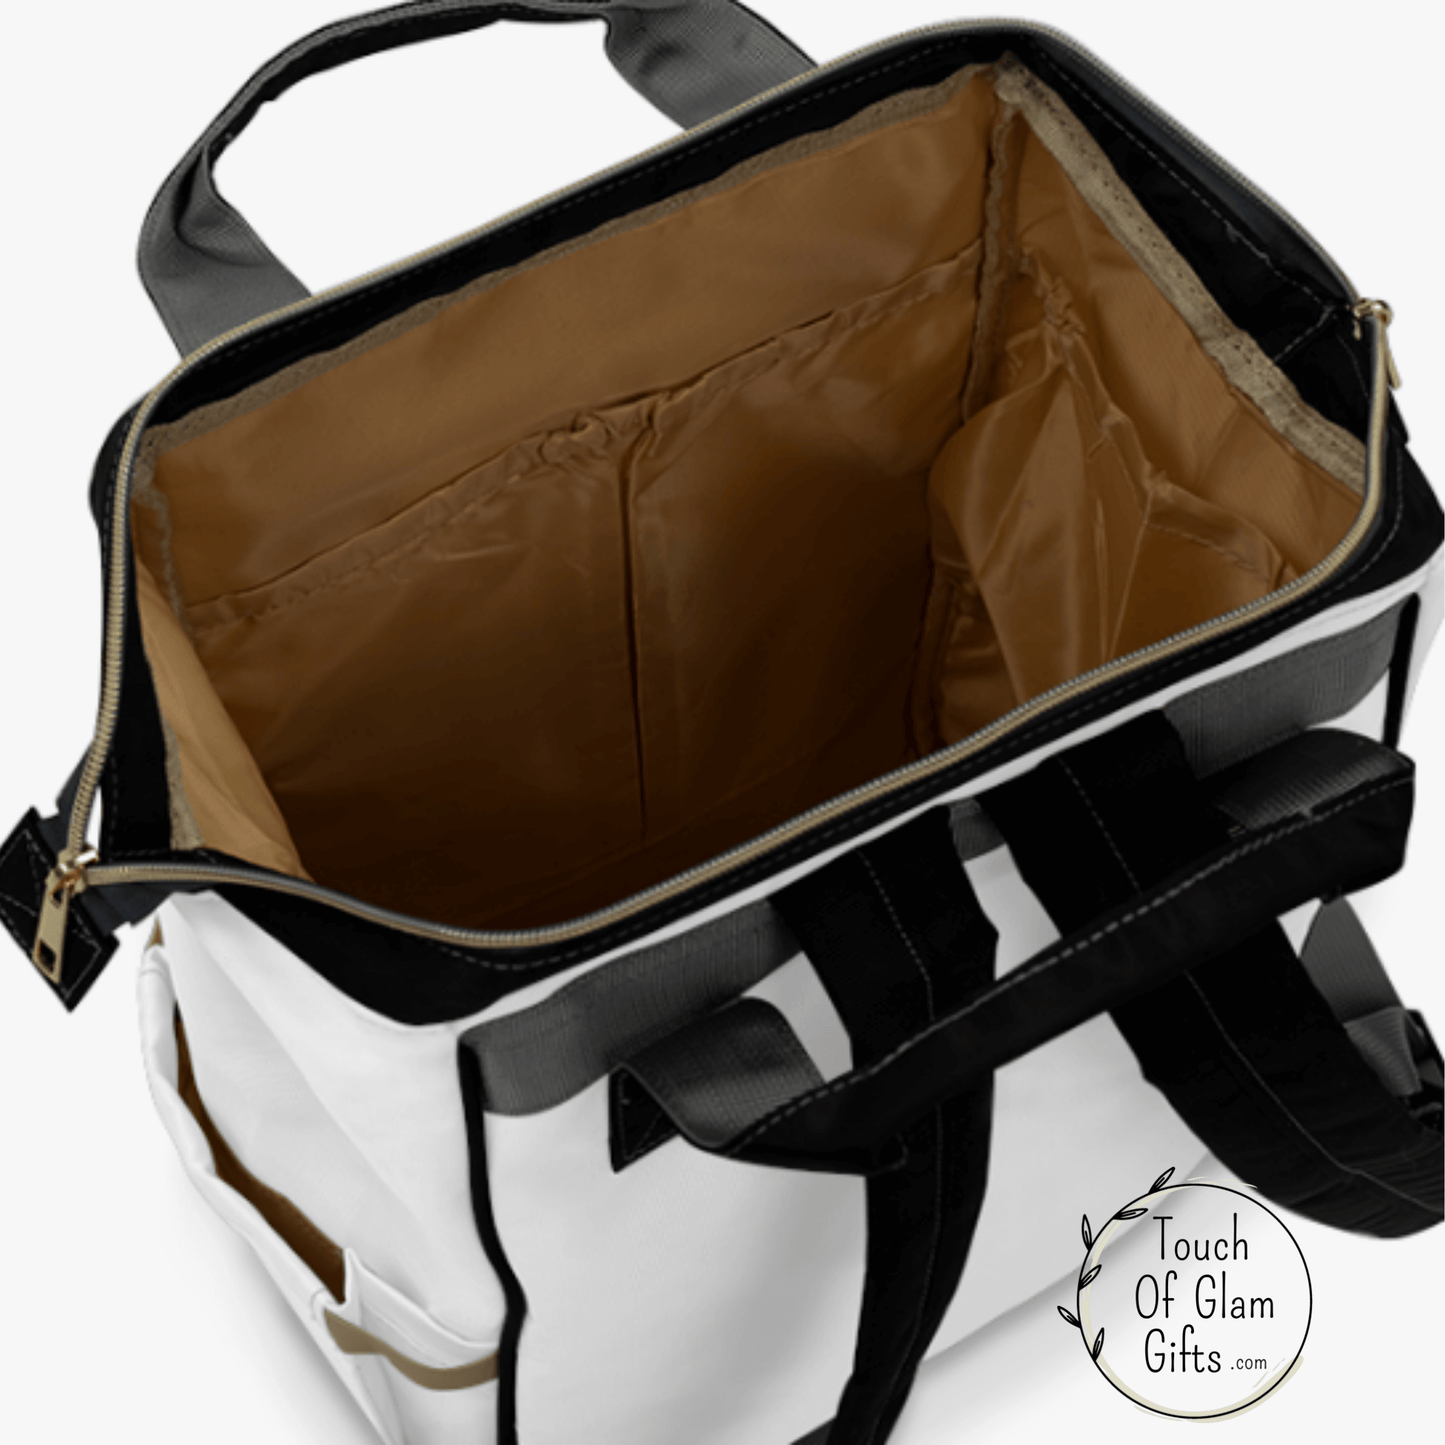 THe inside of the diaper bag is tan color and has multiple pockets for organization.